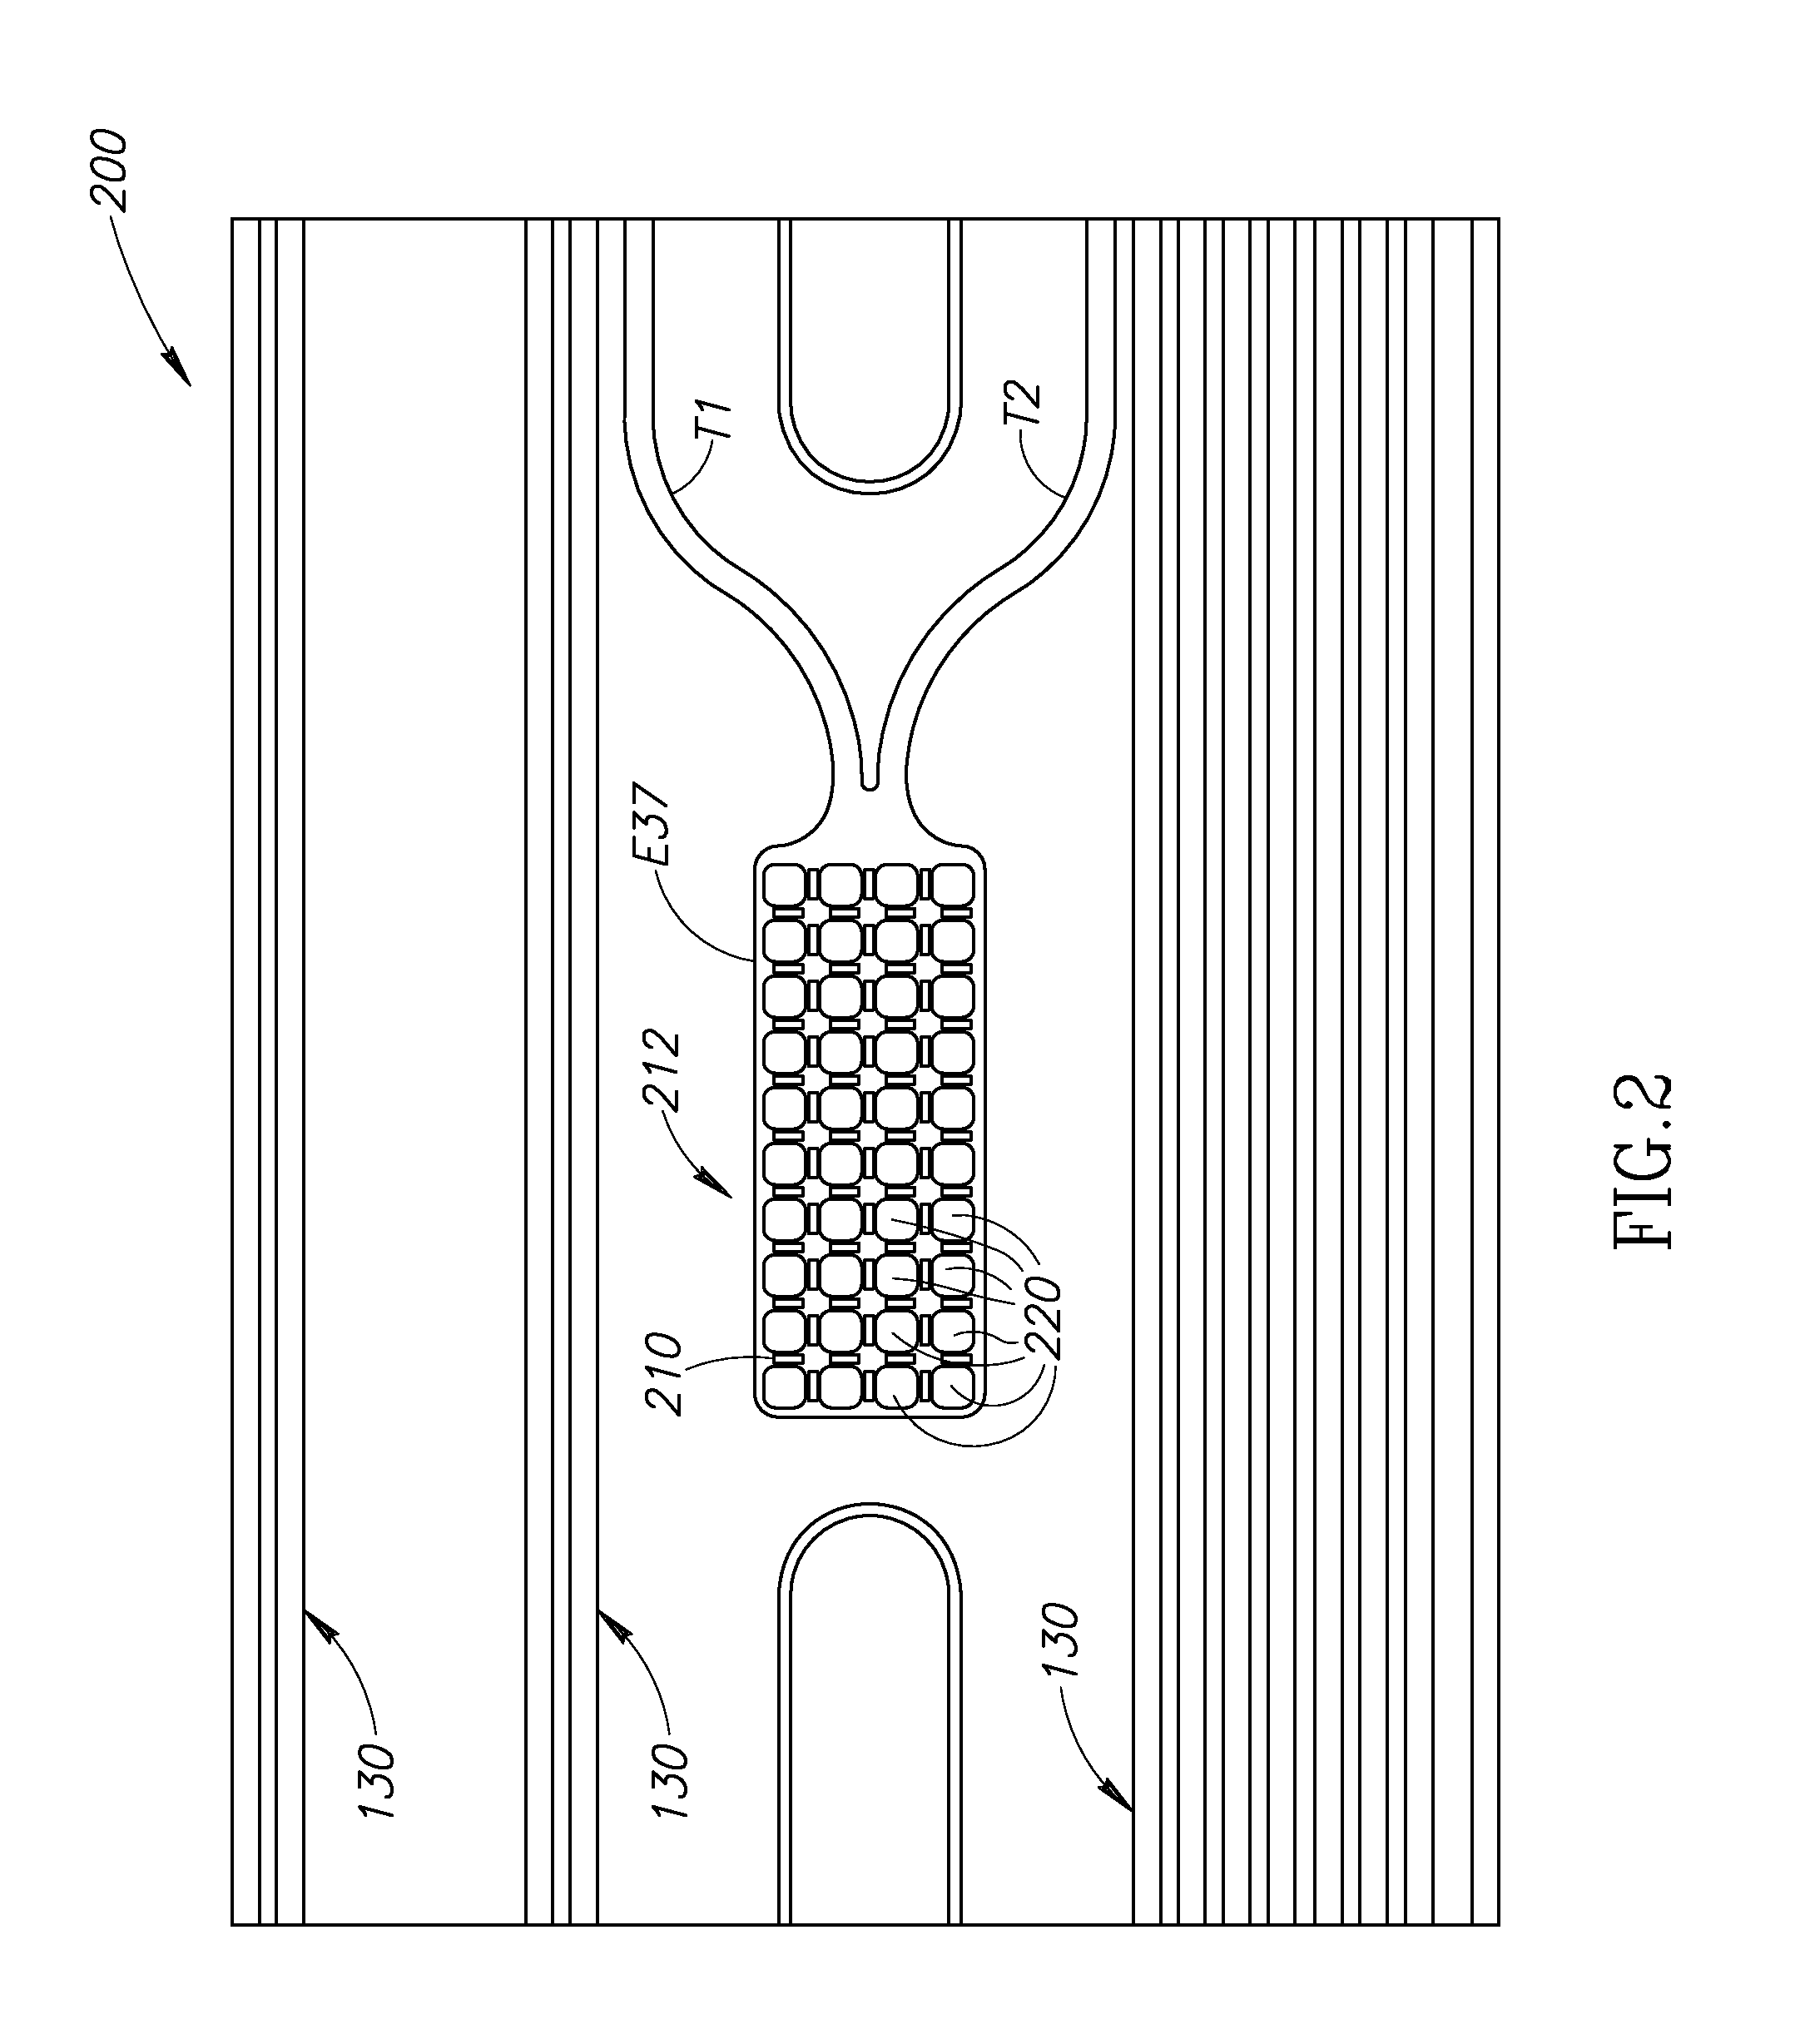 Parylene-based microelectrode array implant for spinal cord stimulation